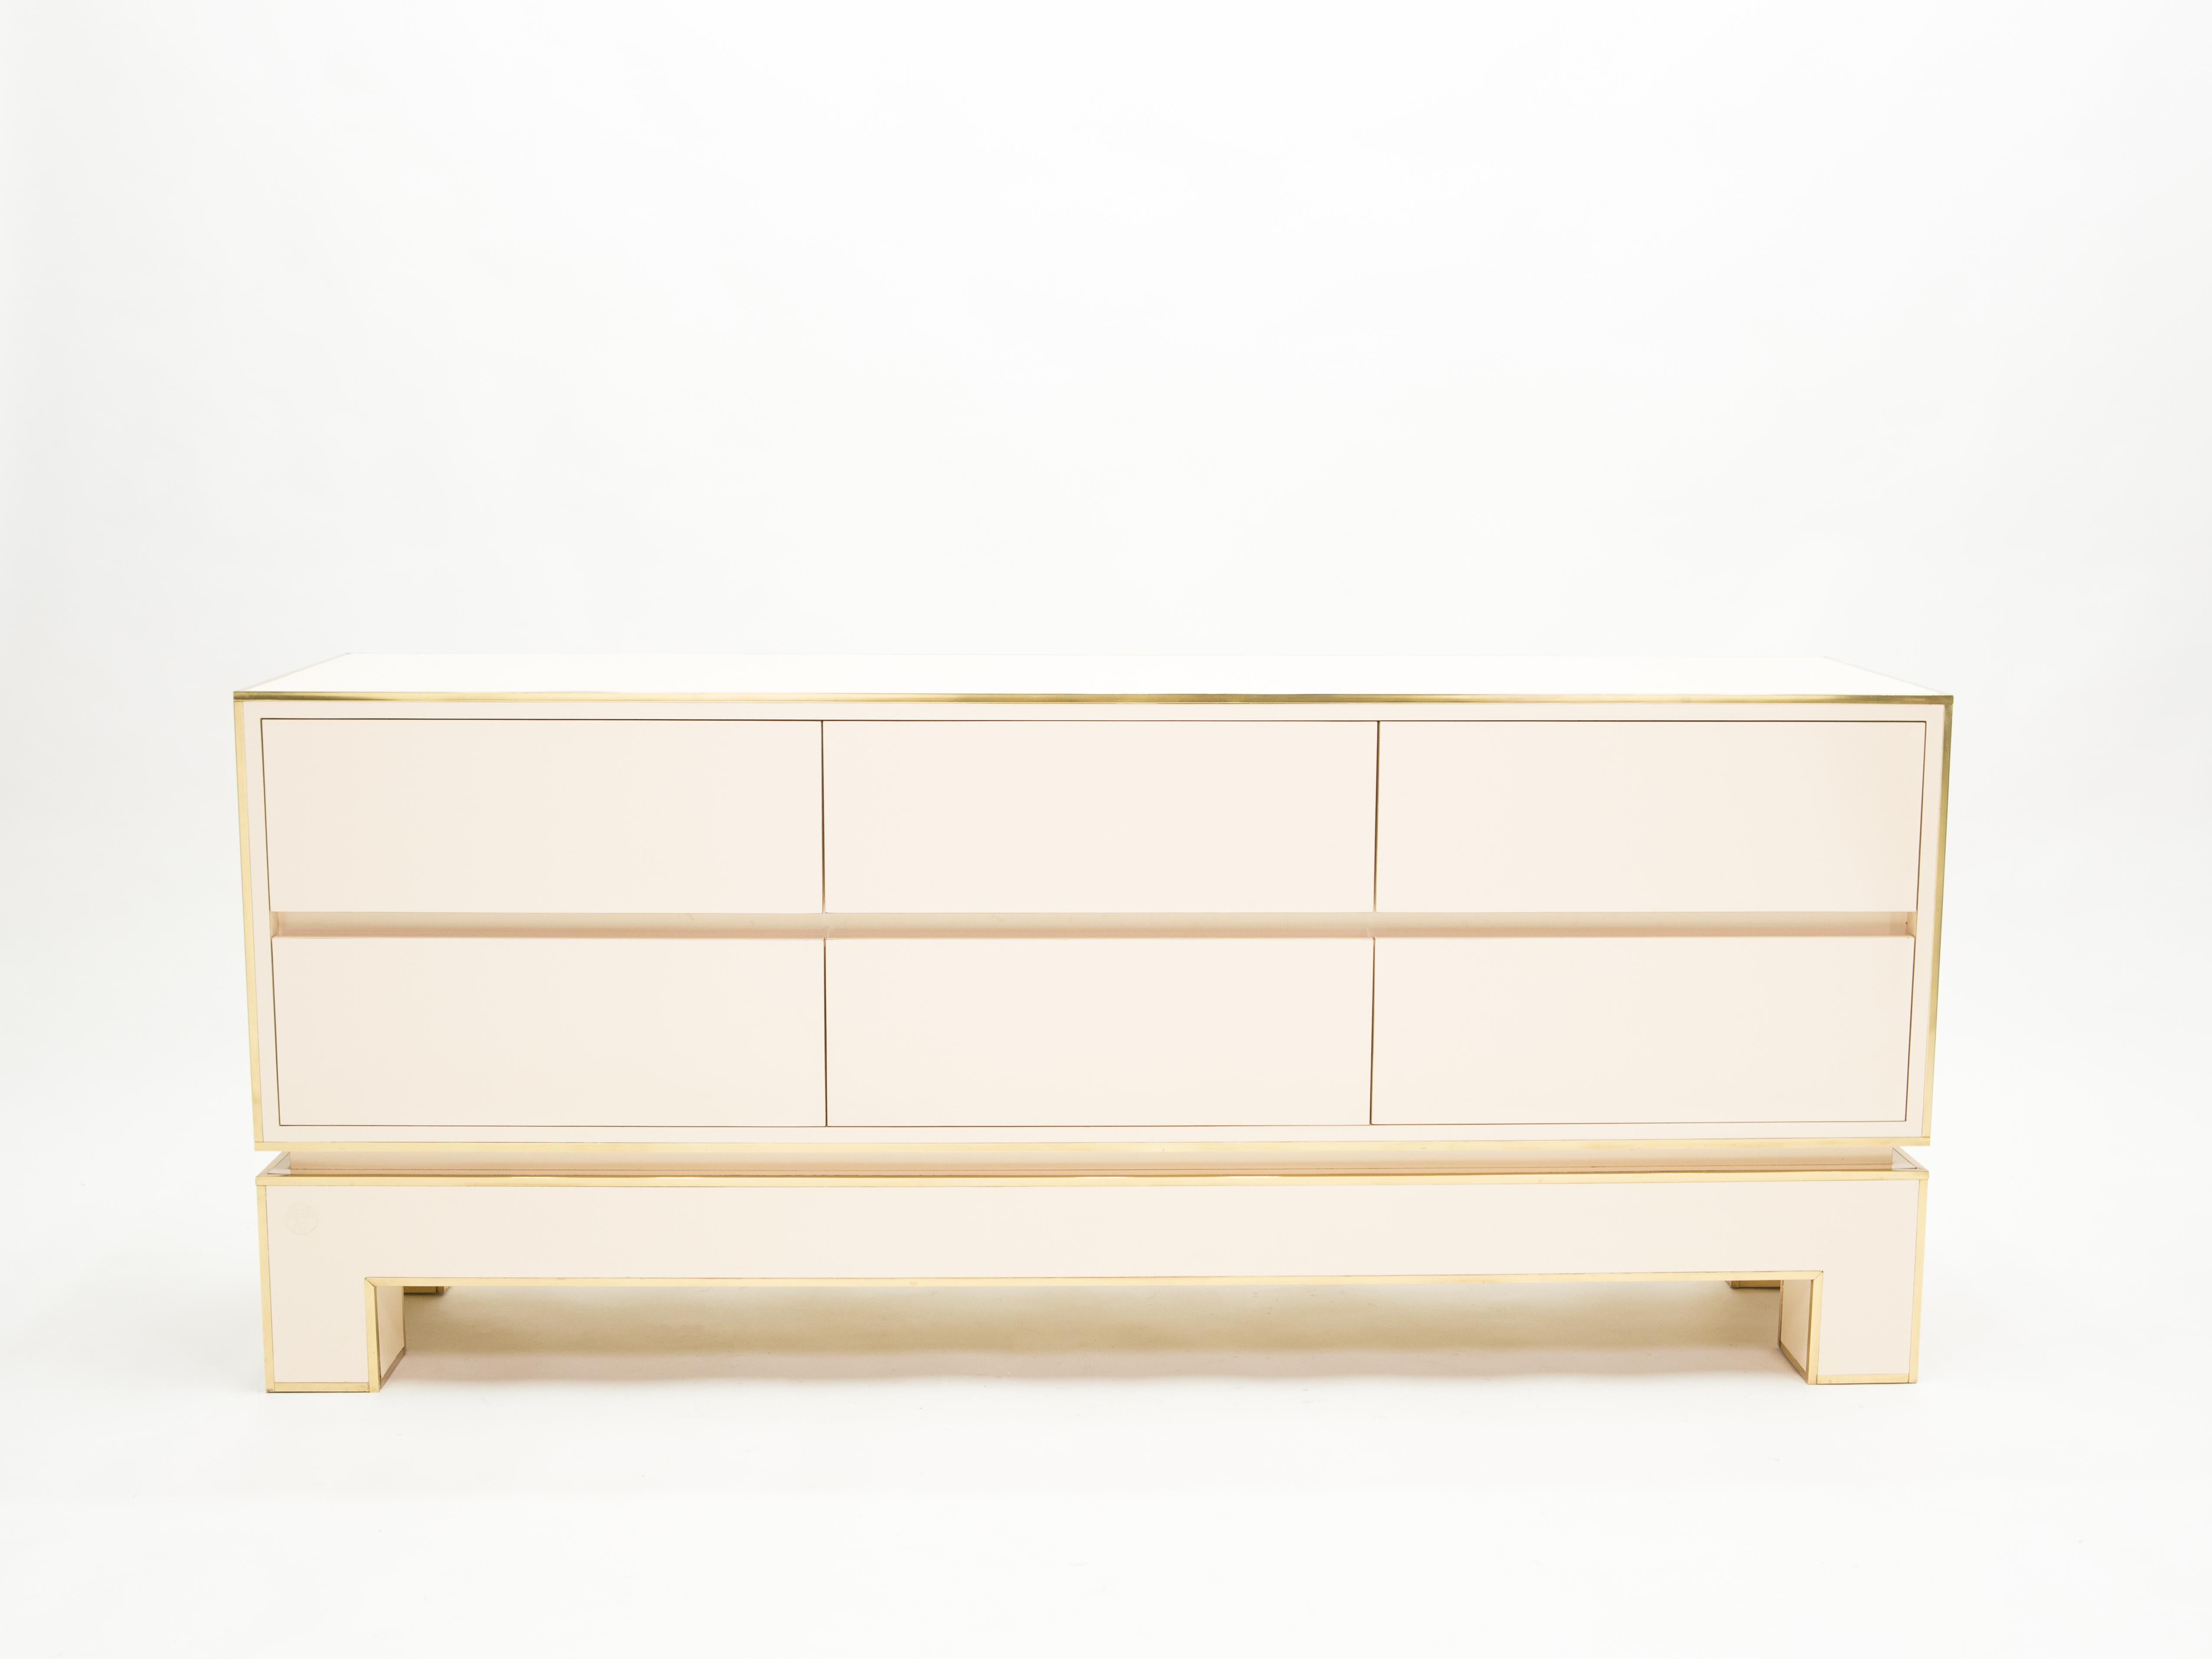 Crispy white lacquer, paired with bright brass accents, feels crisp and luxe on this beautiful and large commode / chest of drawers / sideboard. This beautiful and rare piece is signed by Alain Delon and edited by Maison Jansen in 1975. Its boxy,